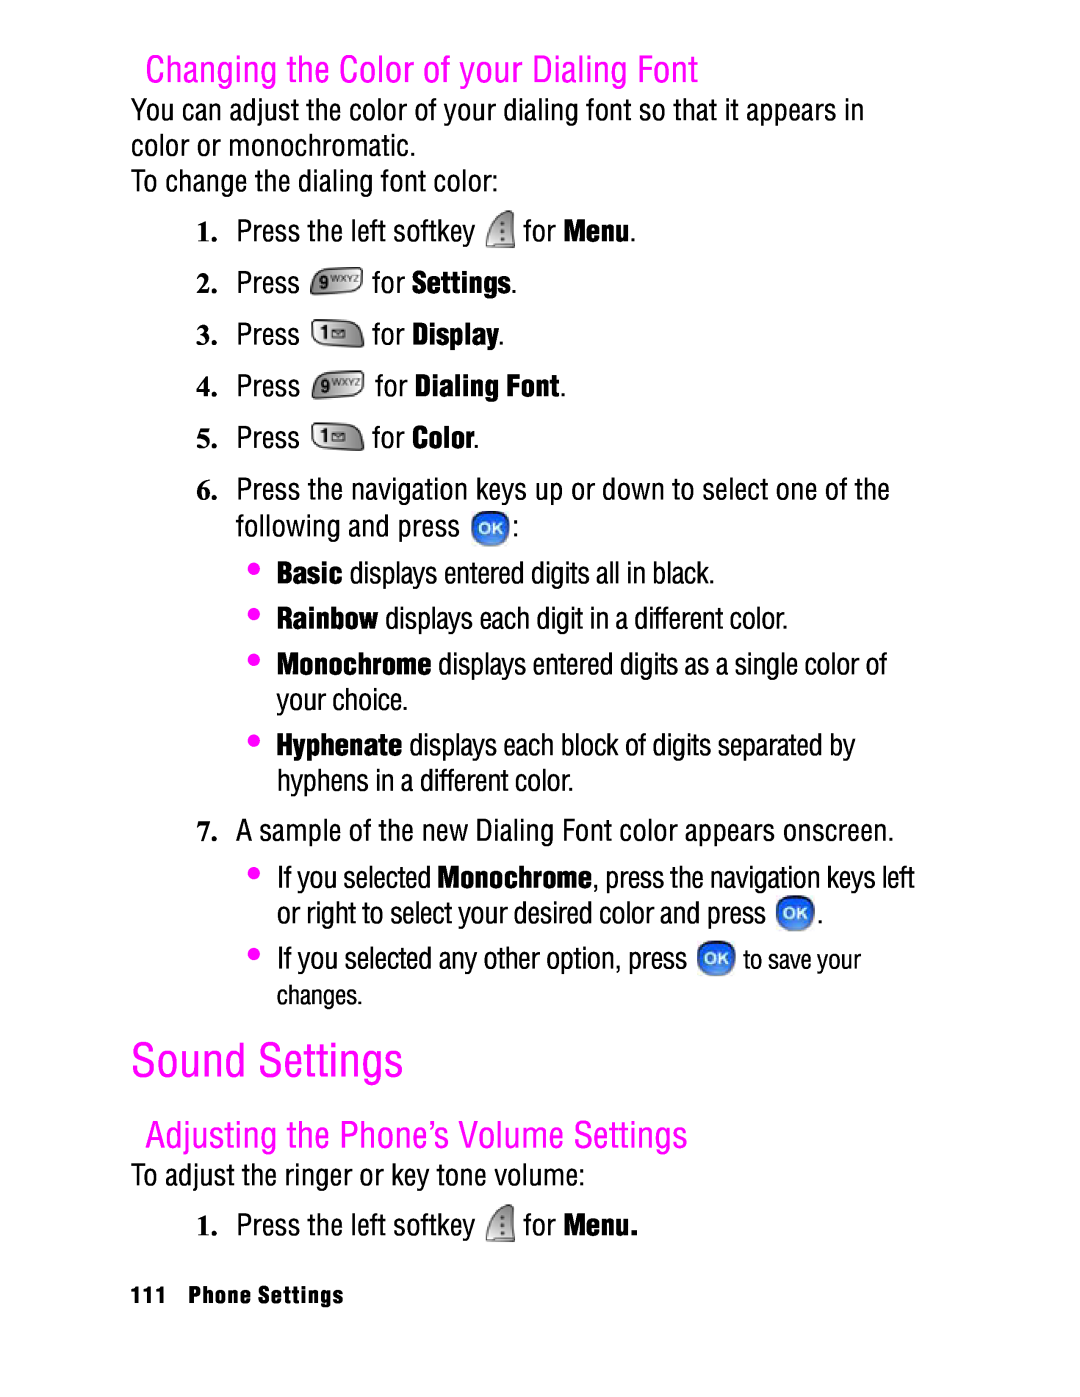 Samsung SPH-a740 manual Sound Settings, Changing the Color of your Dialing Font, Adjusting the Phone’s Volume Settings 